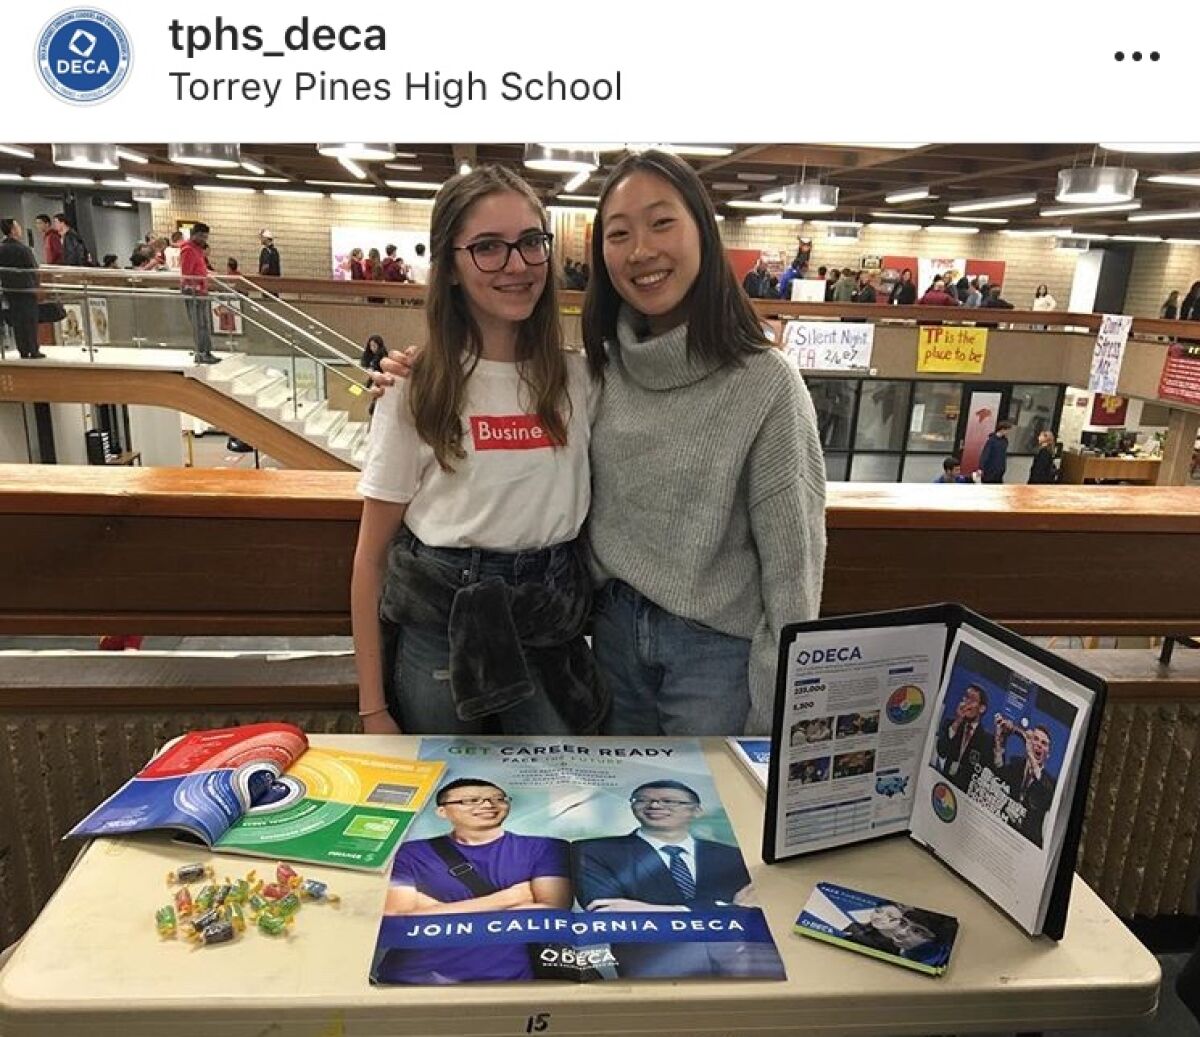 Sophia Gawle and Kelly Wang (DECA officers)